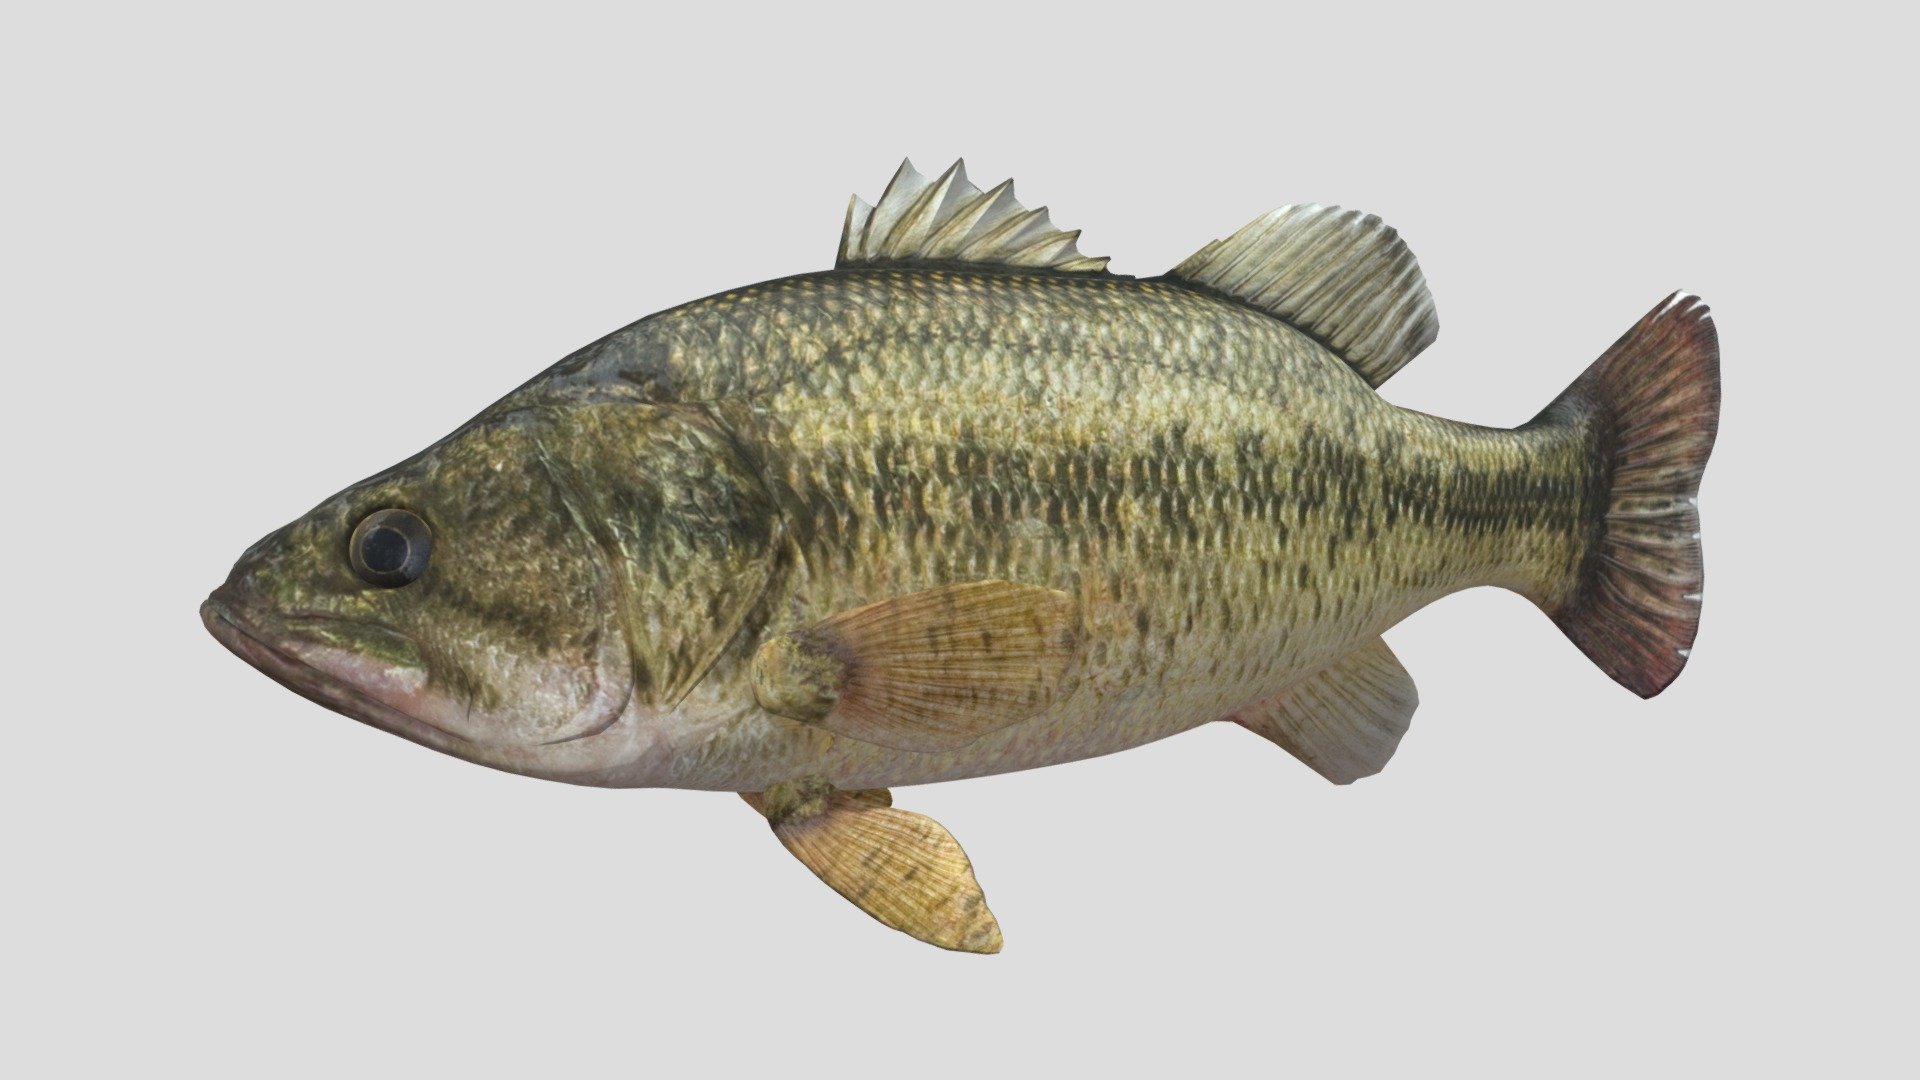 Fish Bass 3D model is a high quality, photo real model that will enhance detail and realism to any of your game projects or commercials. The model has a fully textured, detailed design that allows for close-up renders 3d model